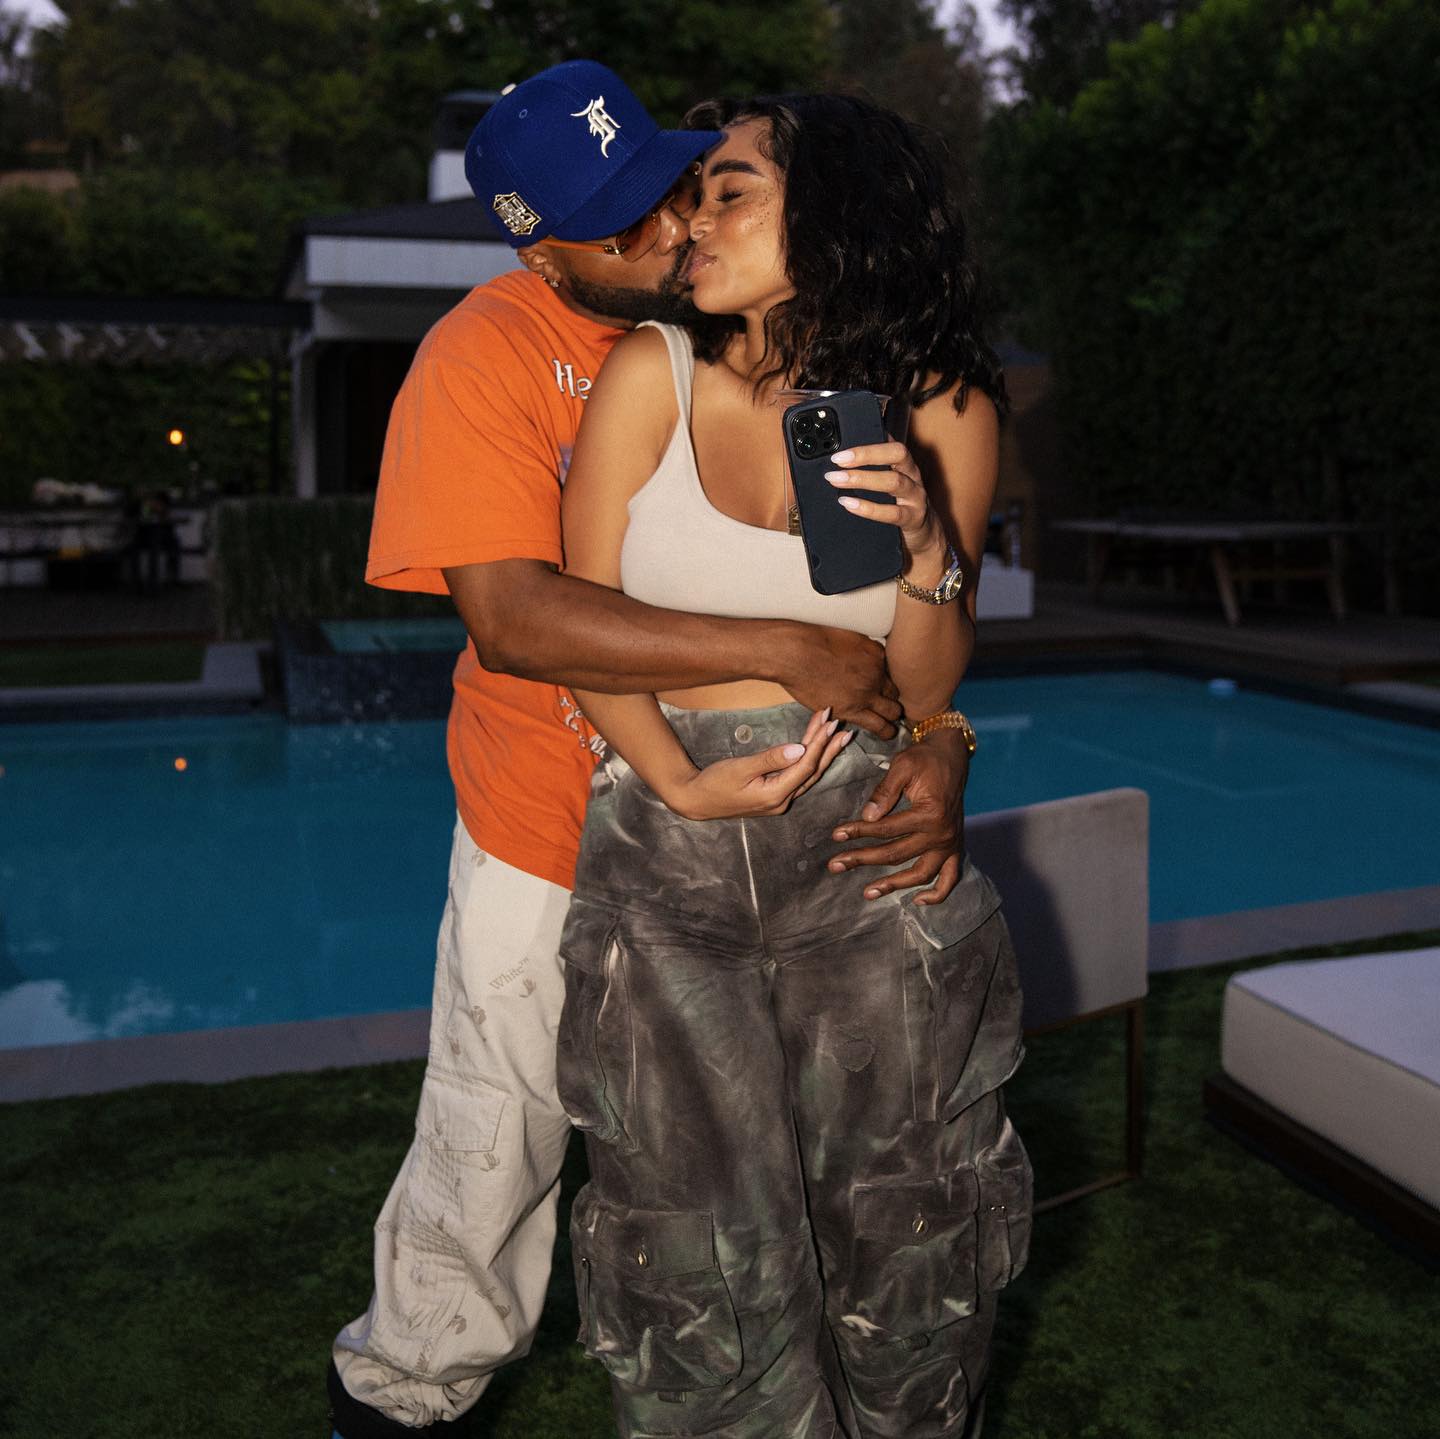 Who is Steelo Brim’s wife and is he married?